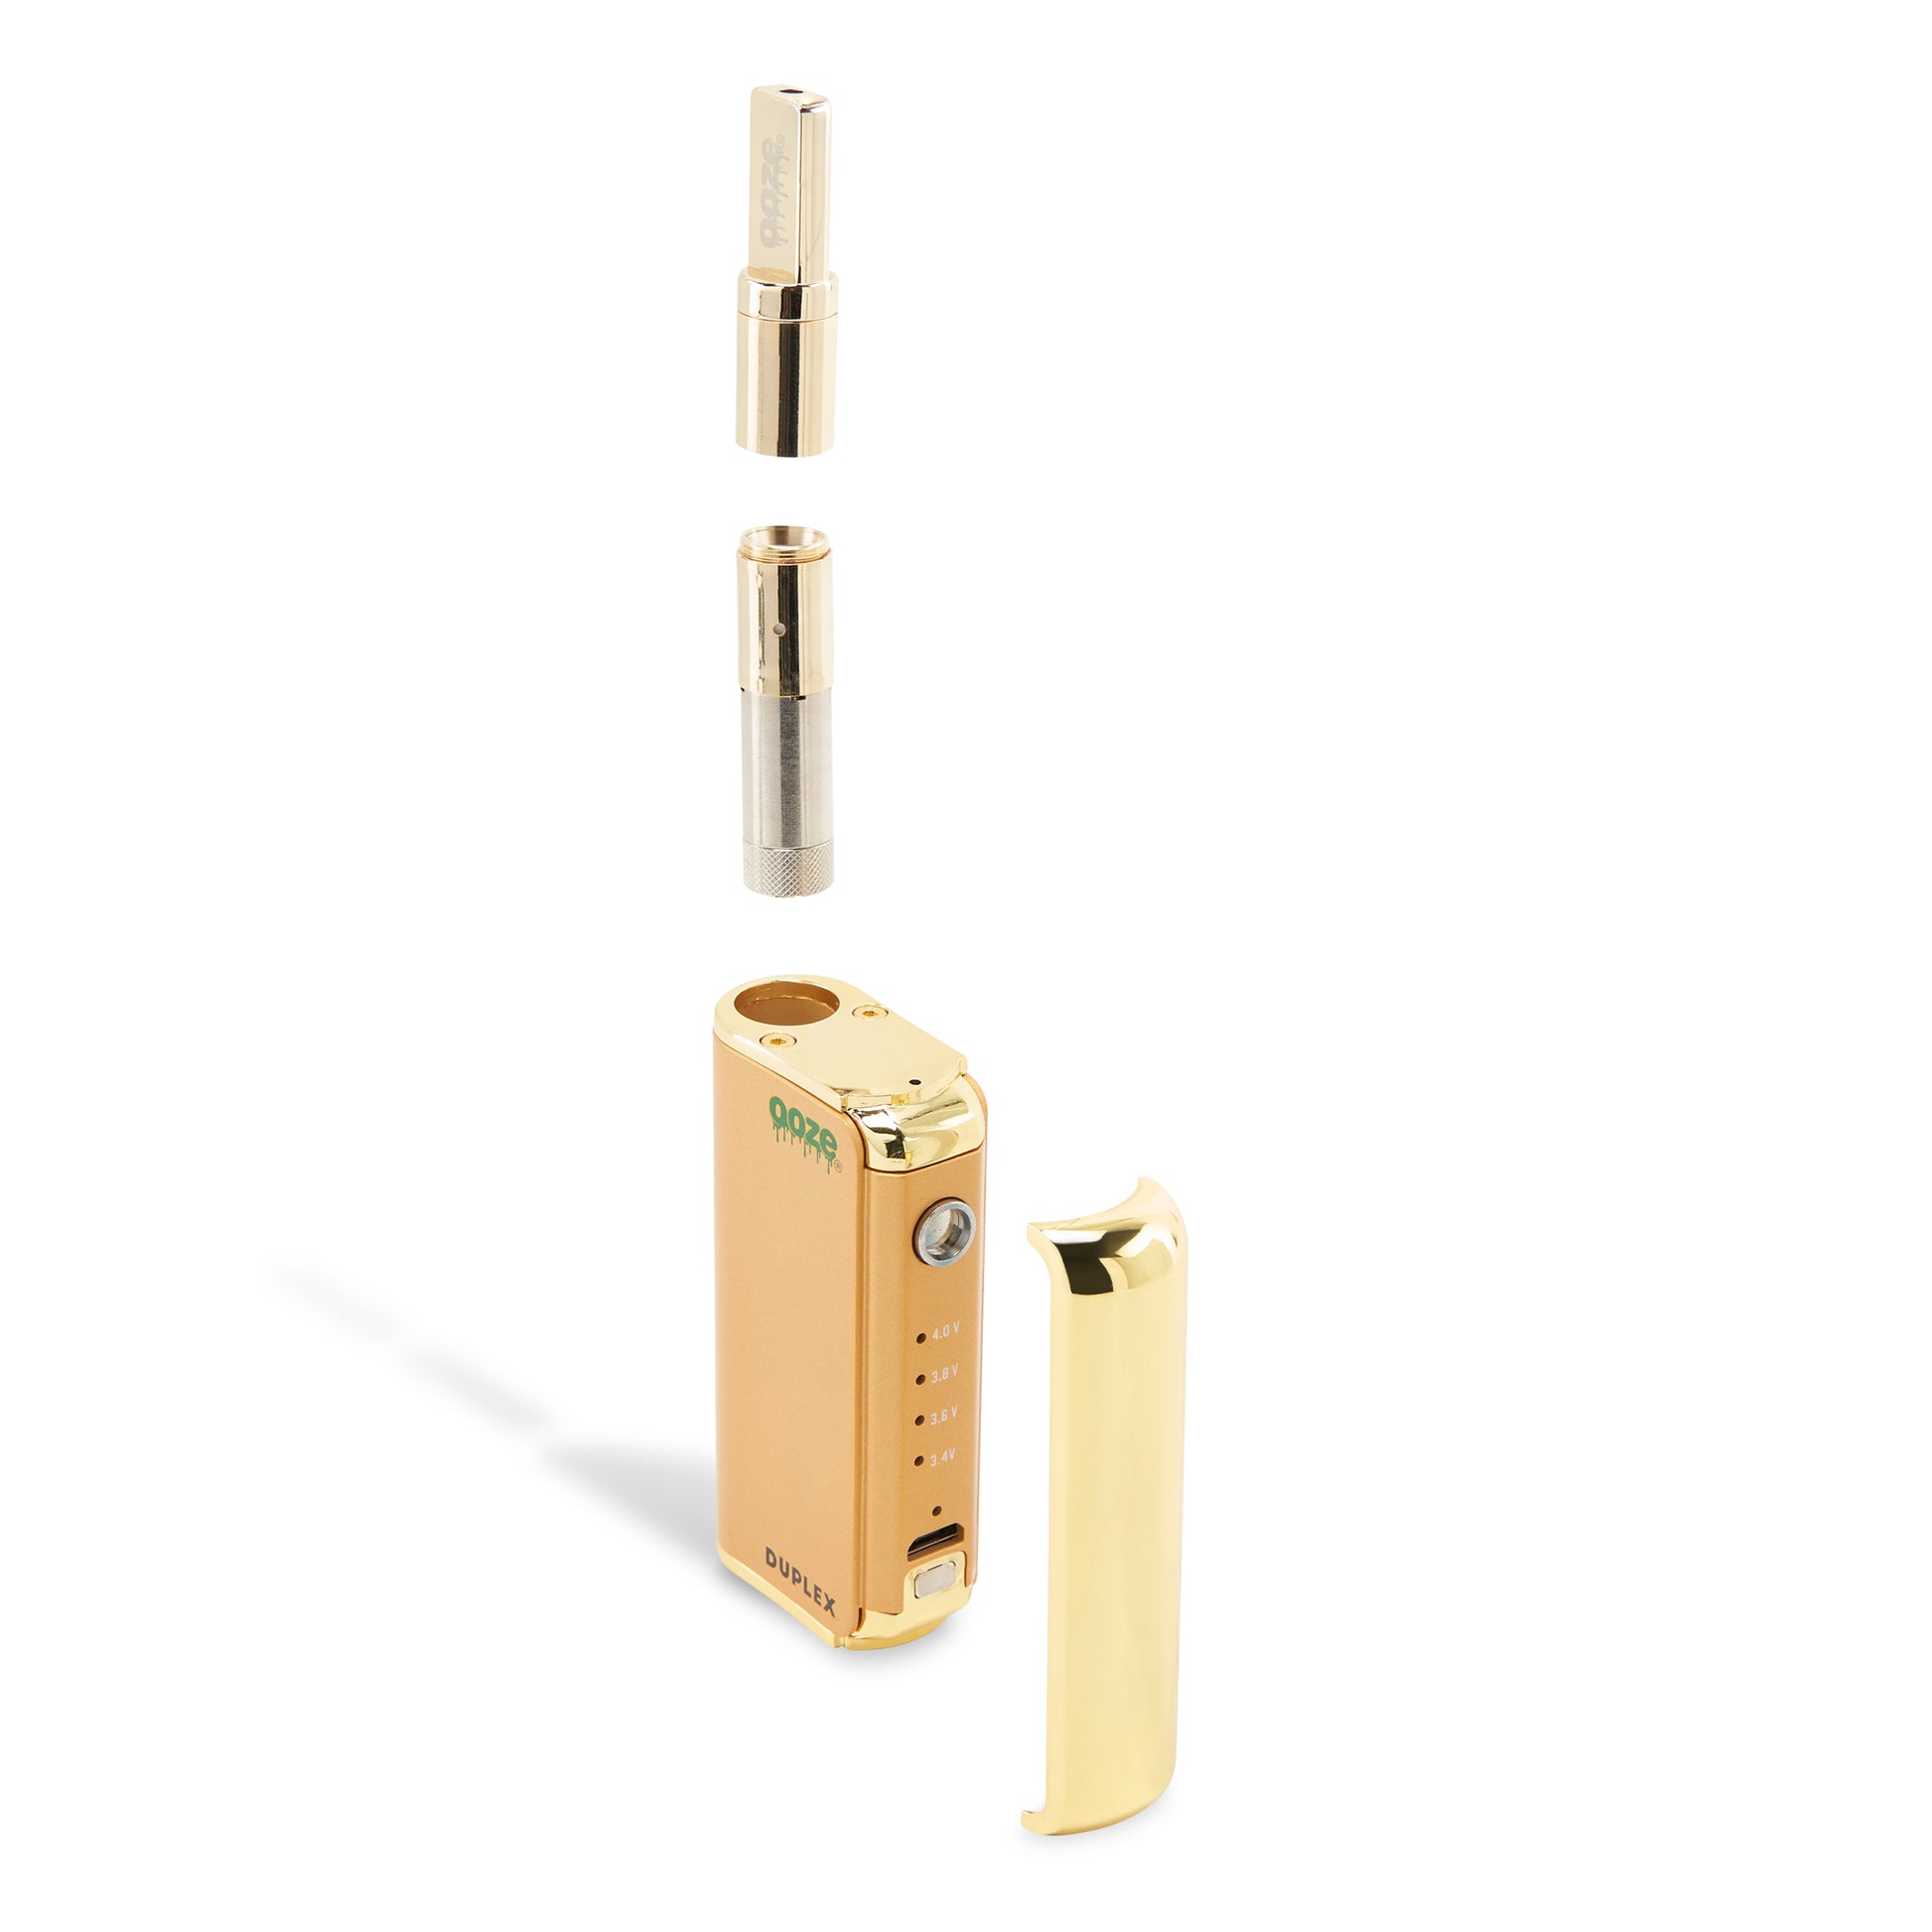 The Lucky Gold Ooze Duplex Pro Vaporizer is shown disassembled. The gold wax tank is attached to the adapter, unscrewed and floating above the device. The magnetic button is pulled in front of the device.